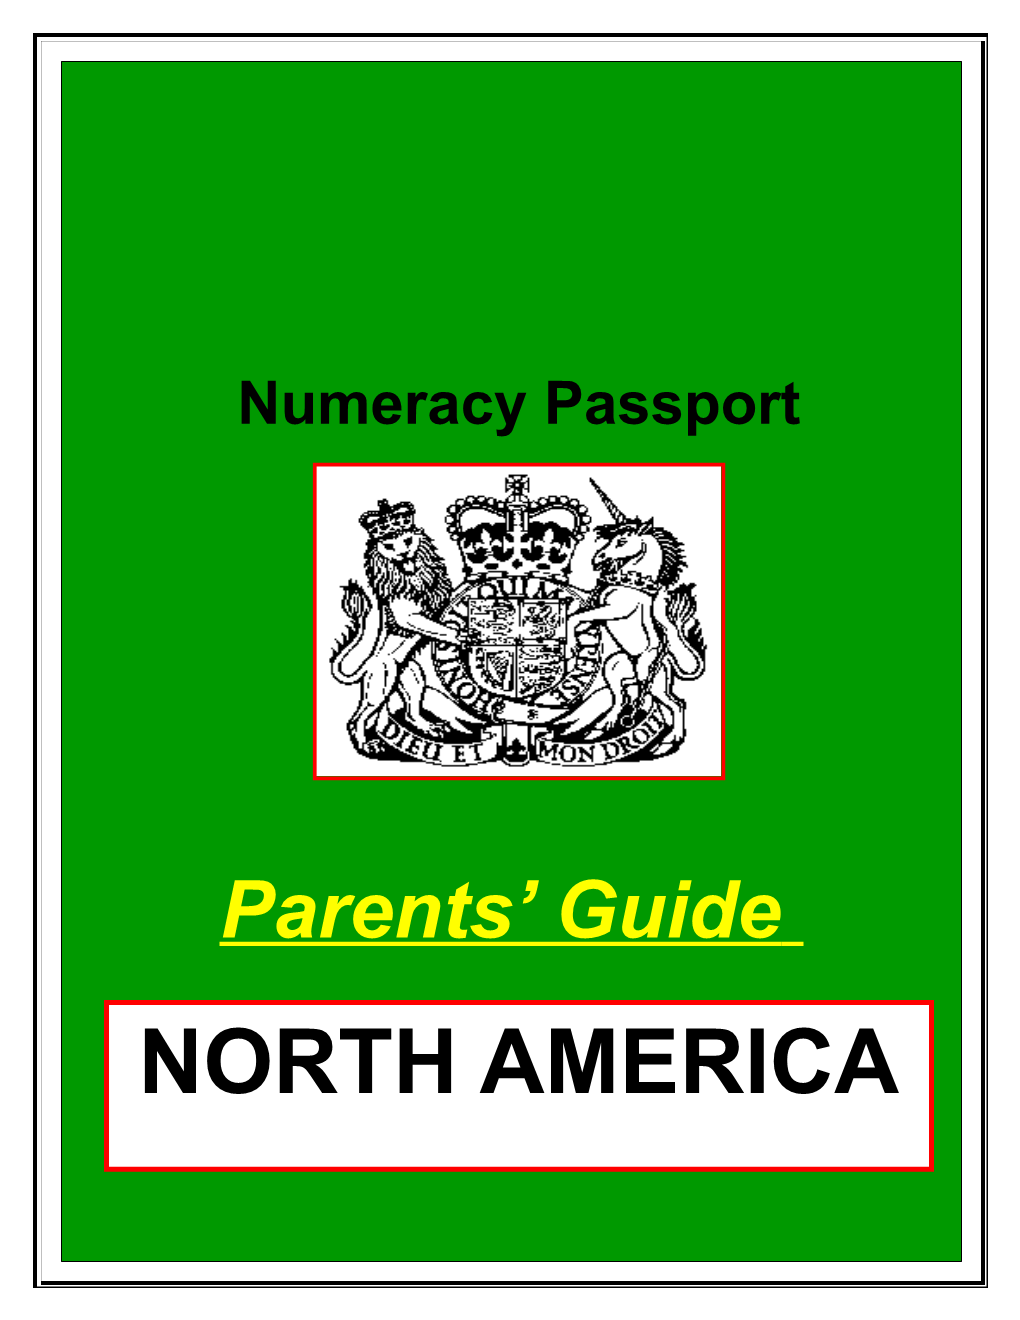 Where Can I Do the Passport Activities with My Child?